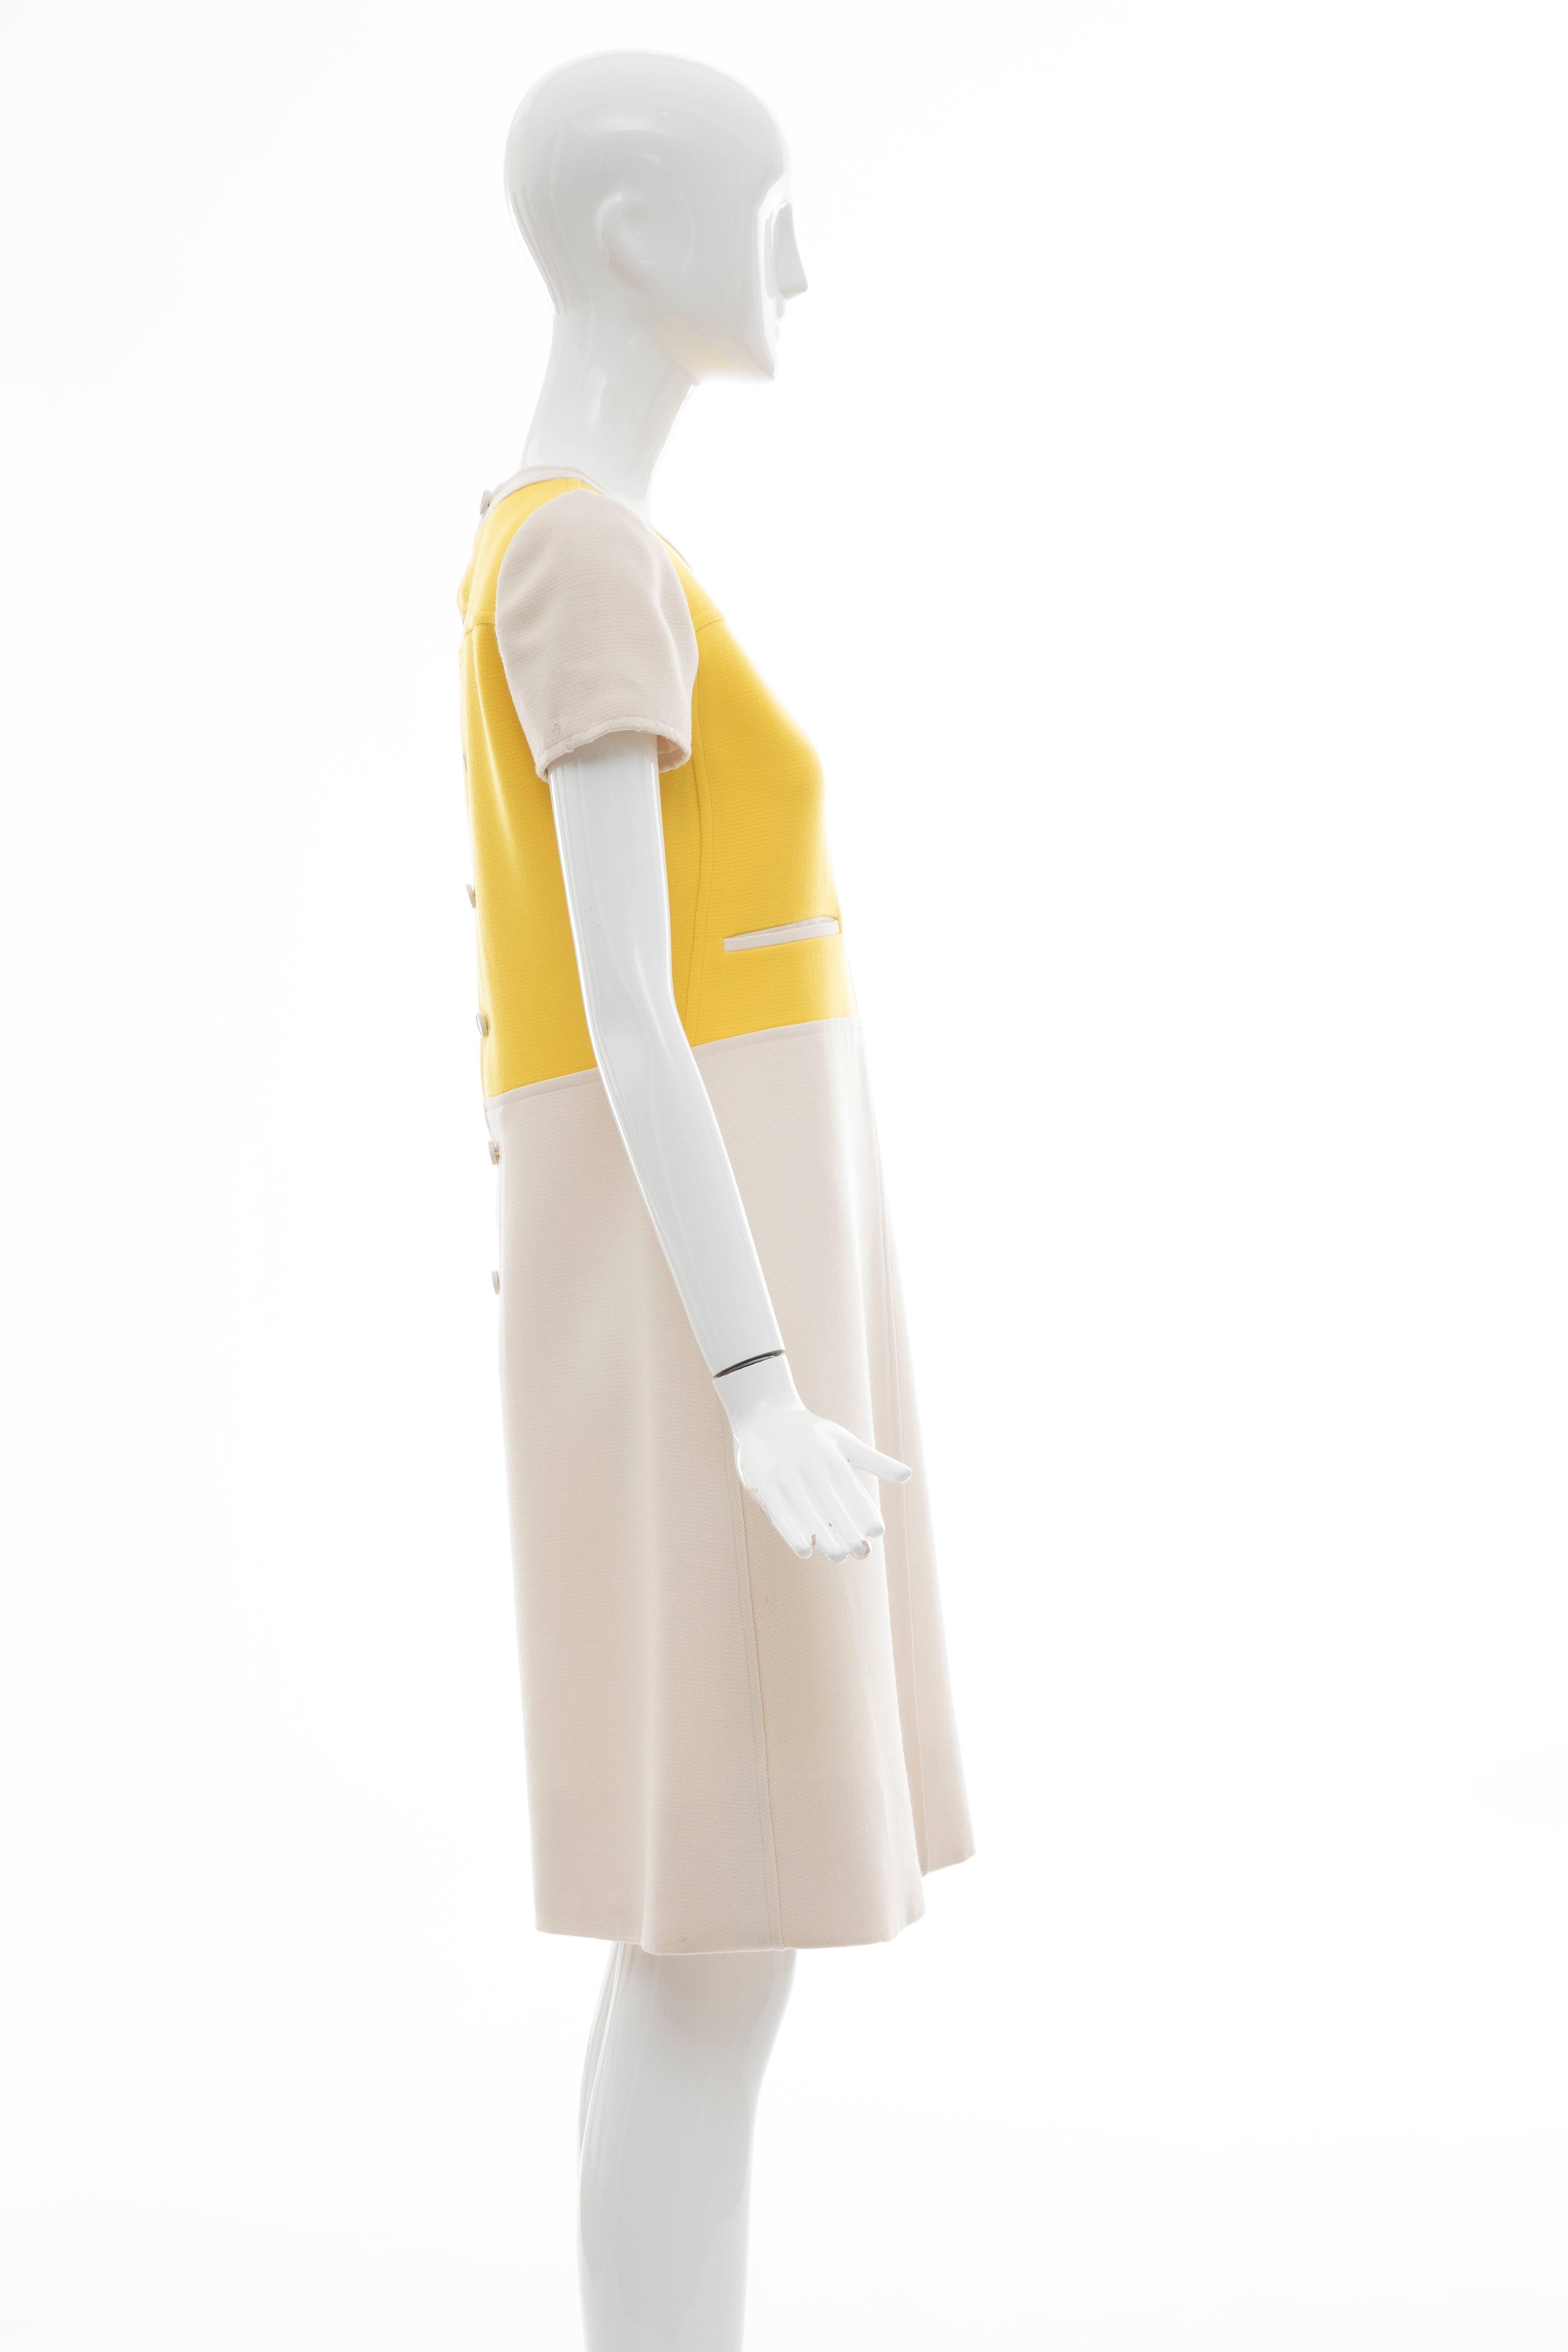 Andre Courreges Wool A-Line Dress , Circa 1960's In Fair Condition For Sale In Cincinnati, OH